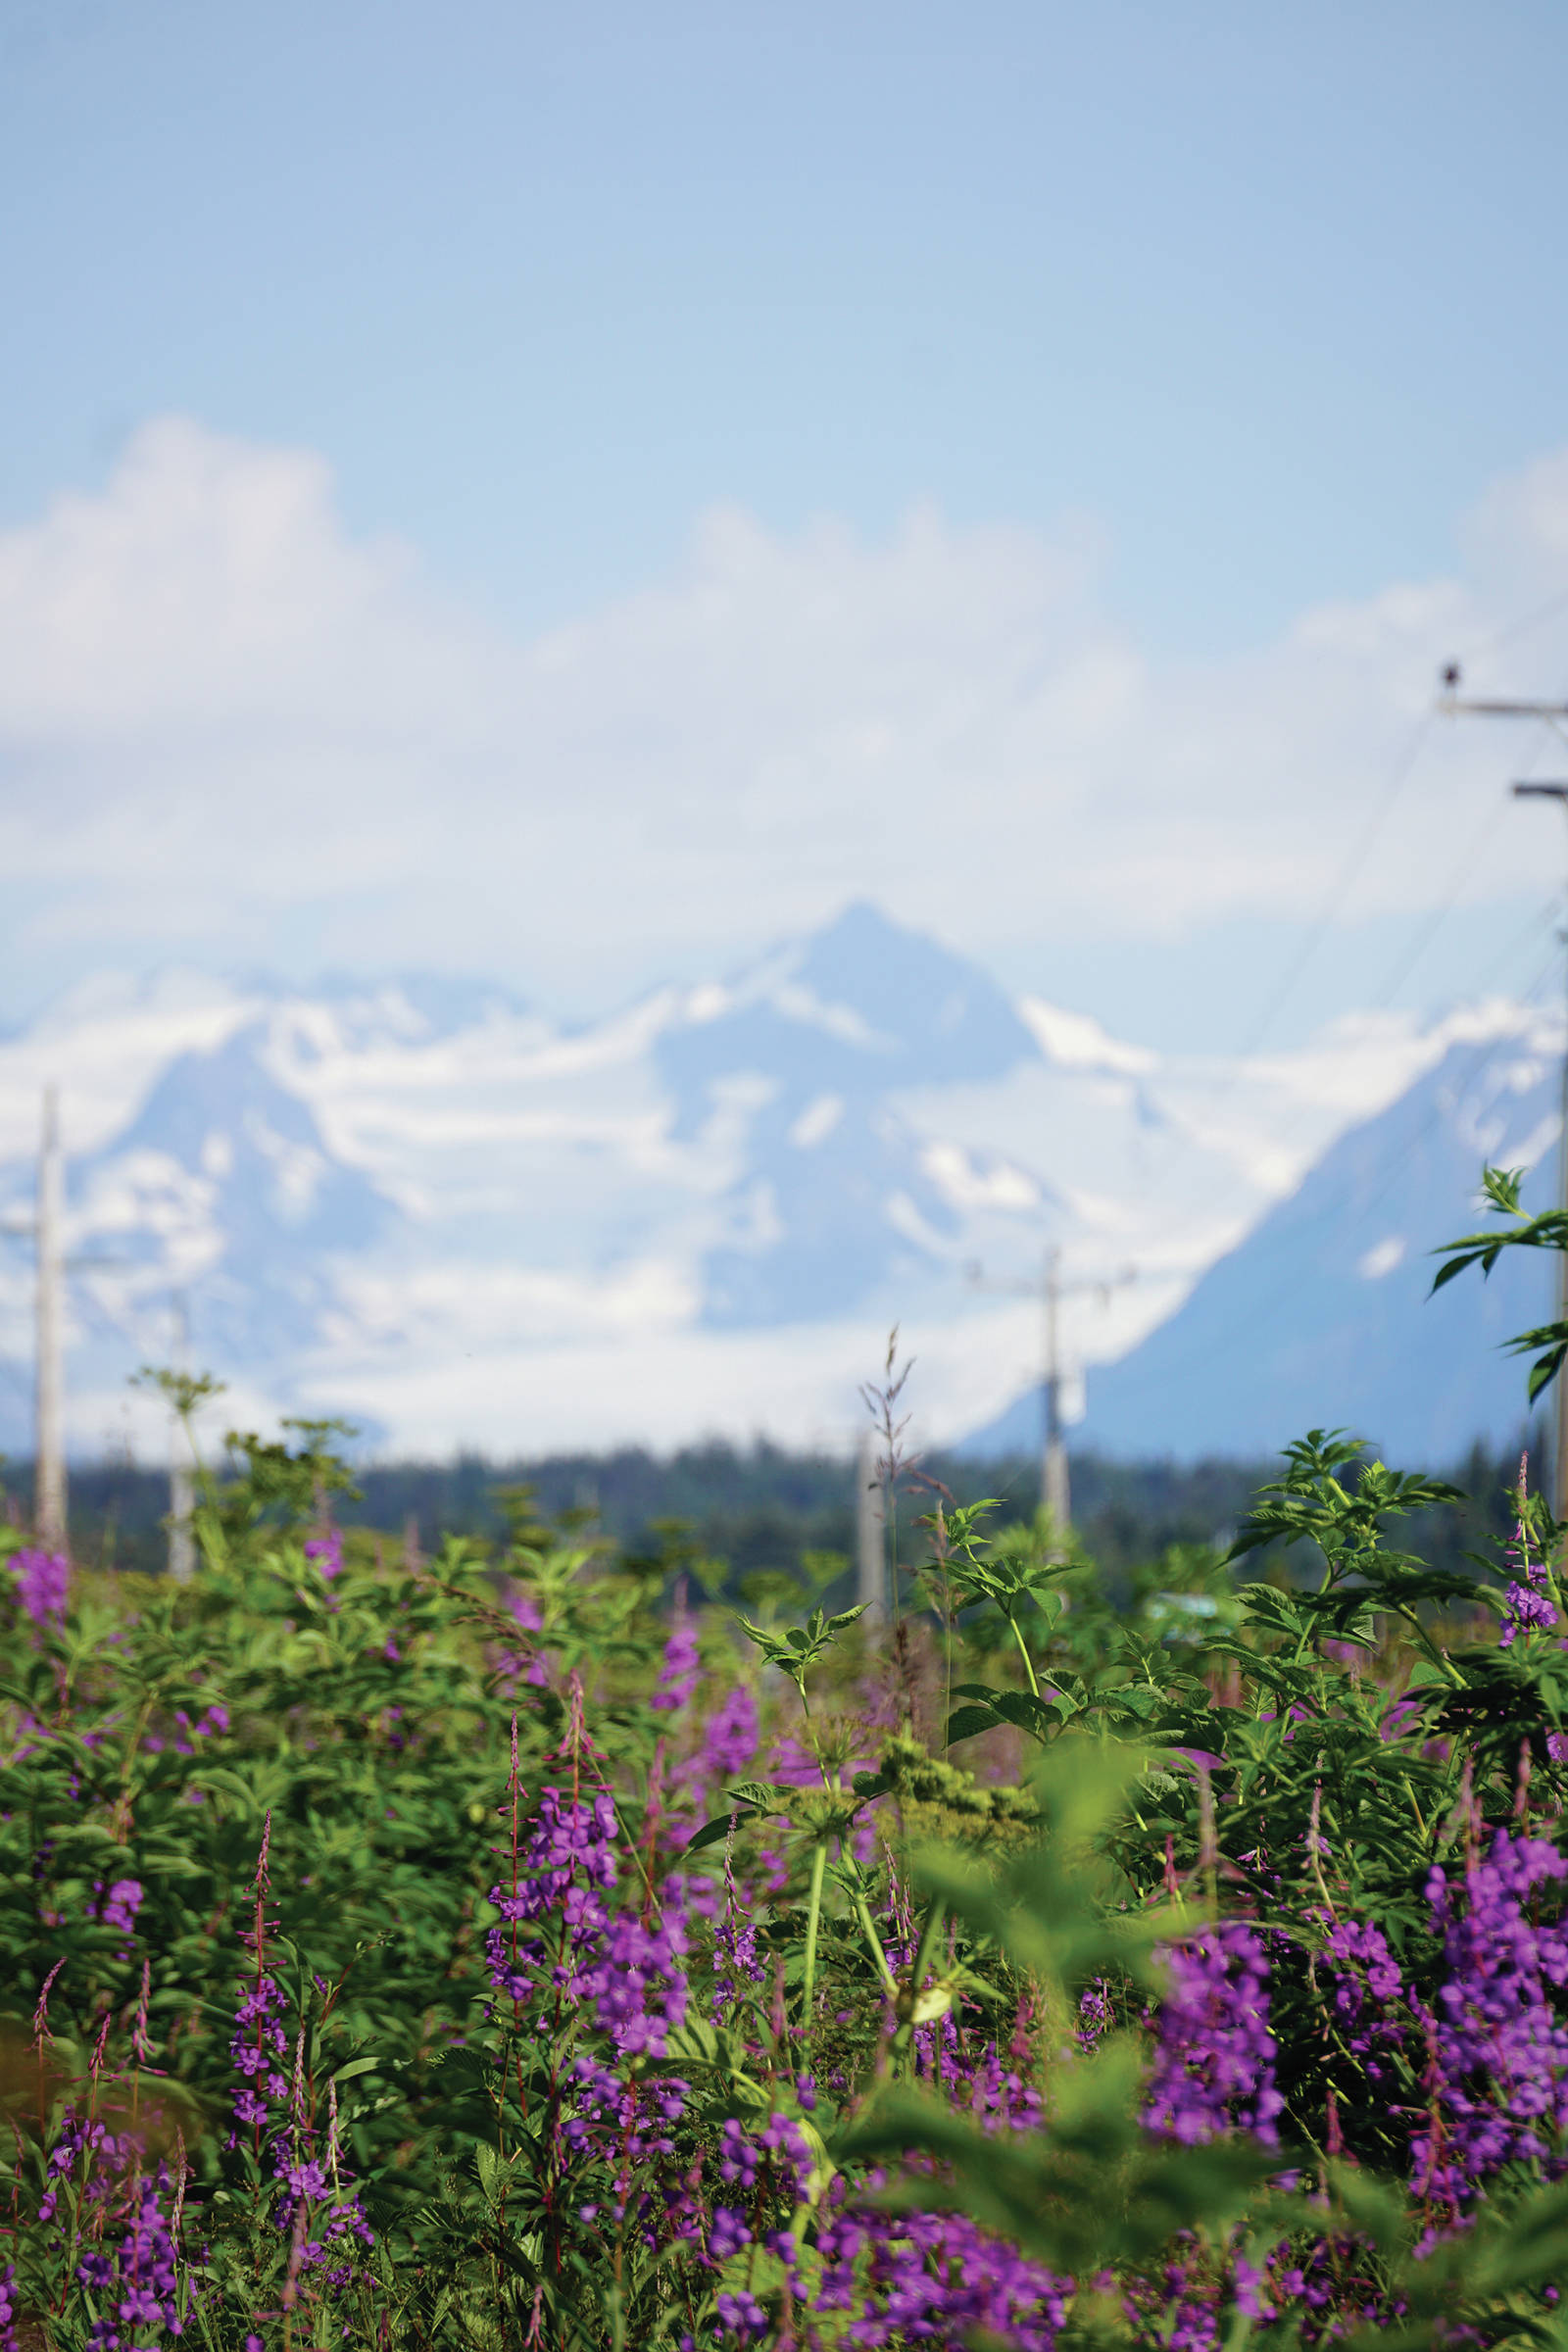 Fabulous fireweed Fireweed blooms on July 17 in the fields around Diamond Ridge Road in Homer, as Grewingk Glacier looms across Kachemak Bay. (Photo by MIchael Armstrong/Homer News)